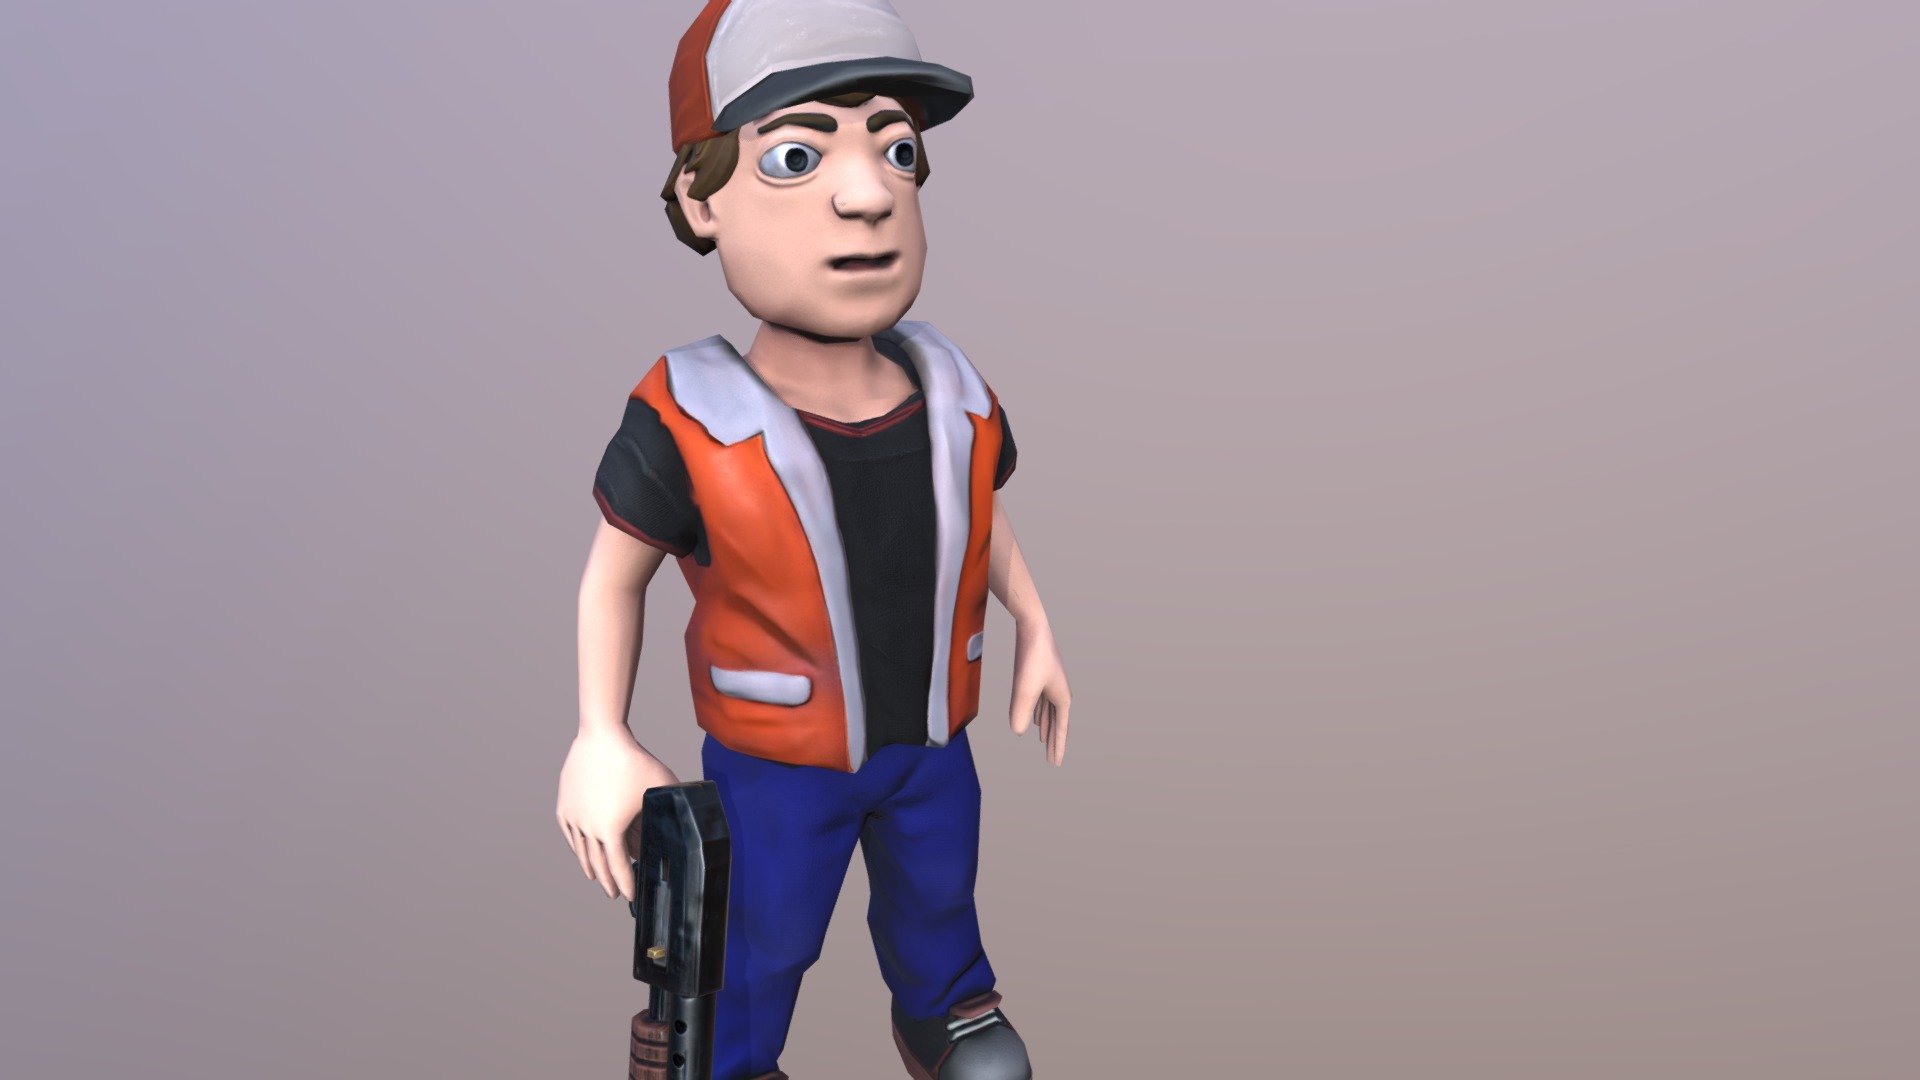 Cartoon Boy with cap and shotgun. ( baseball bat on additional files)

 3d low-poly rigged animated model:
boy                  - 1928 tris
cap                  - 234 tris
shotgun         - 320 tris
baseball bat - 73 tris  

PBR Textures:
 Albedo, Normal map, Occlusion, Specular, Metalness, Roughness.  resolution -2048*2048

12 Animations:
idle, walk, run, idle attack, hand attack, baseball bat attack, shotgun fire, shotgun reload, jump, damage, death, wake up. 

Addition pack contains: FBX files, akeytsu animation file, TGA textures, Unity 5 package 3d model